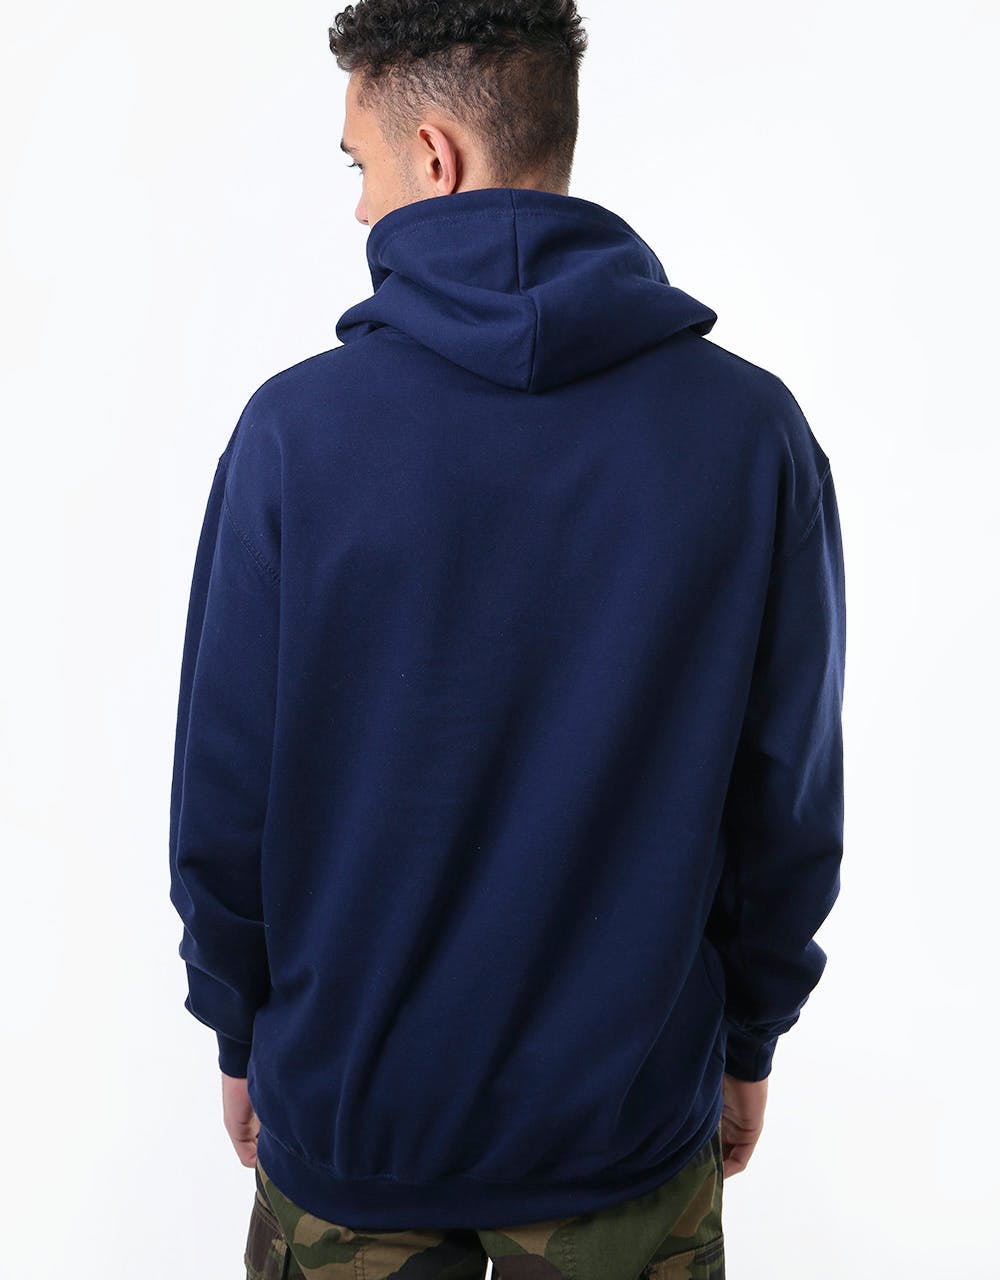 Route One Bull Pullover Hoodie - Navy